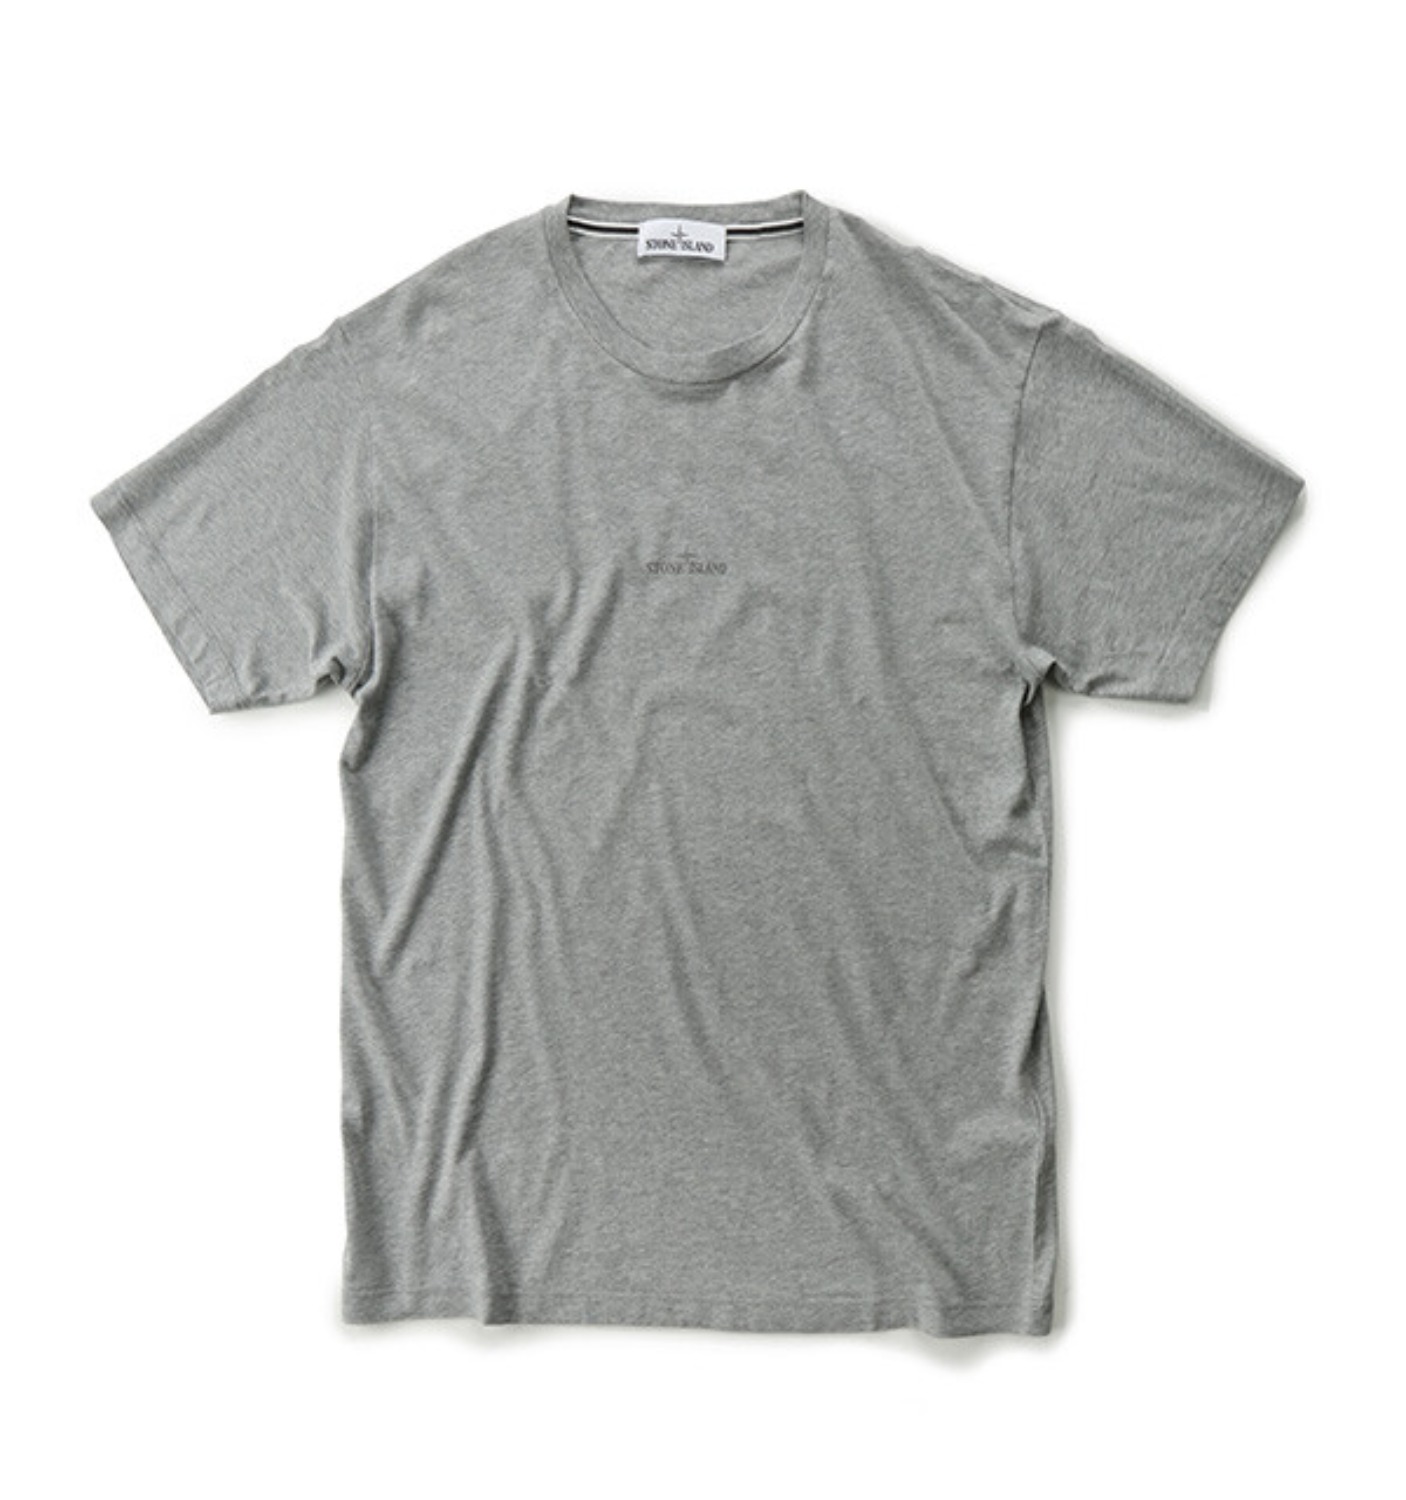 GRAPHIC EIGHT JERSEY T SHIRT GREY